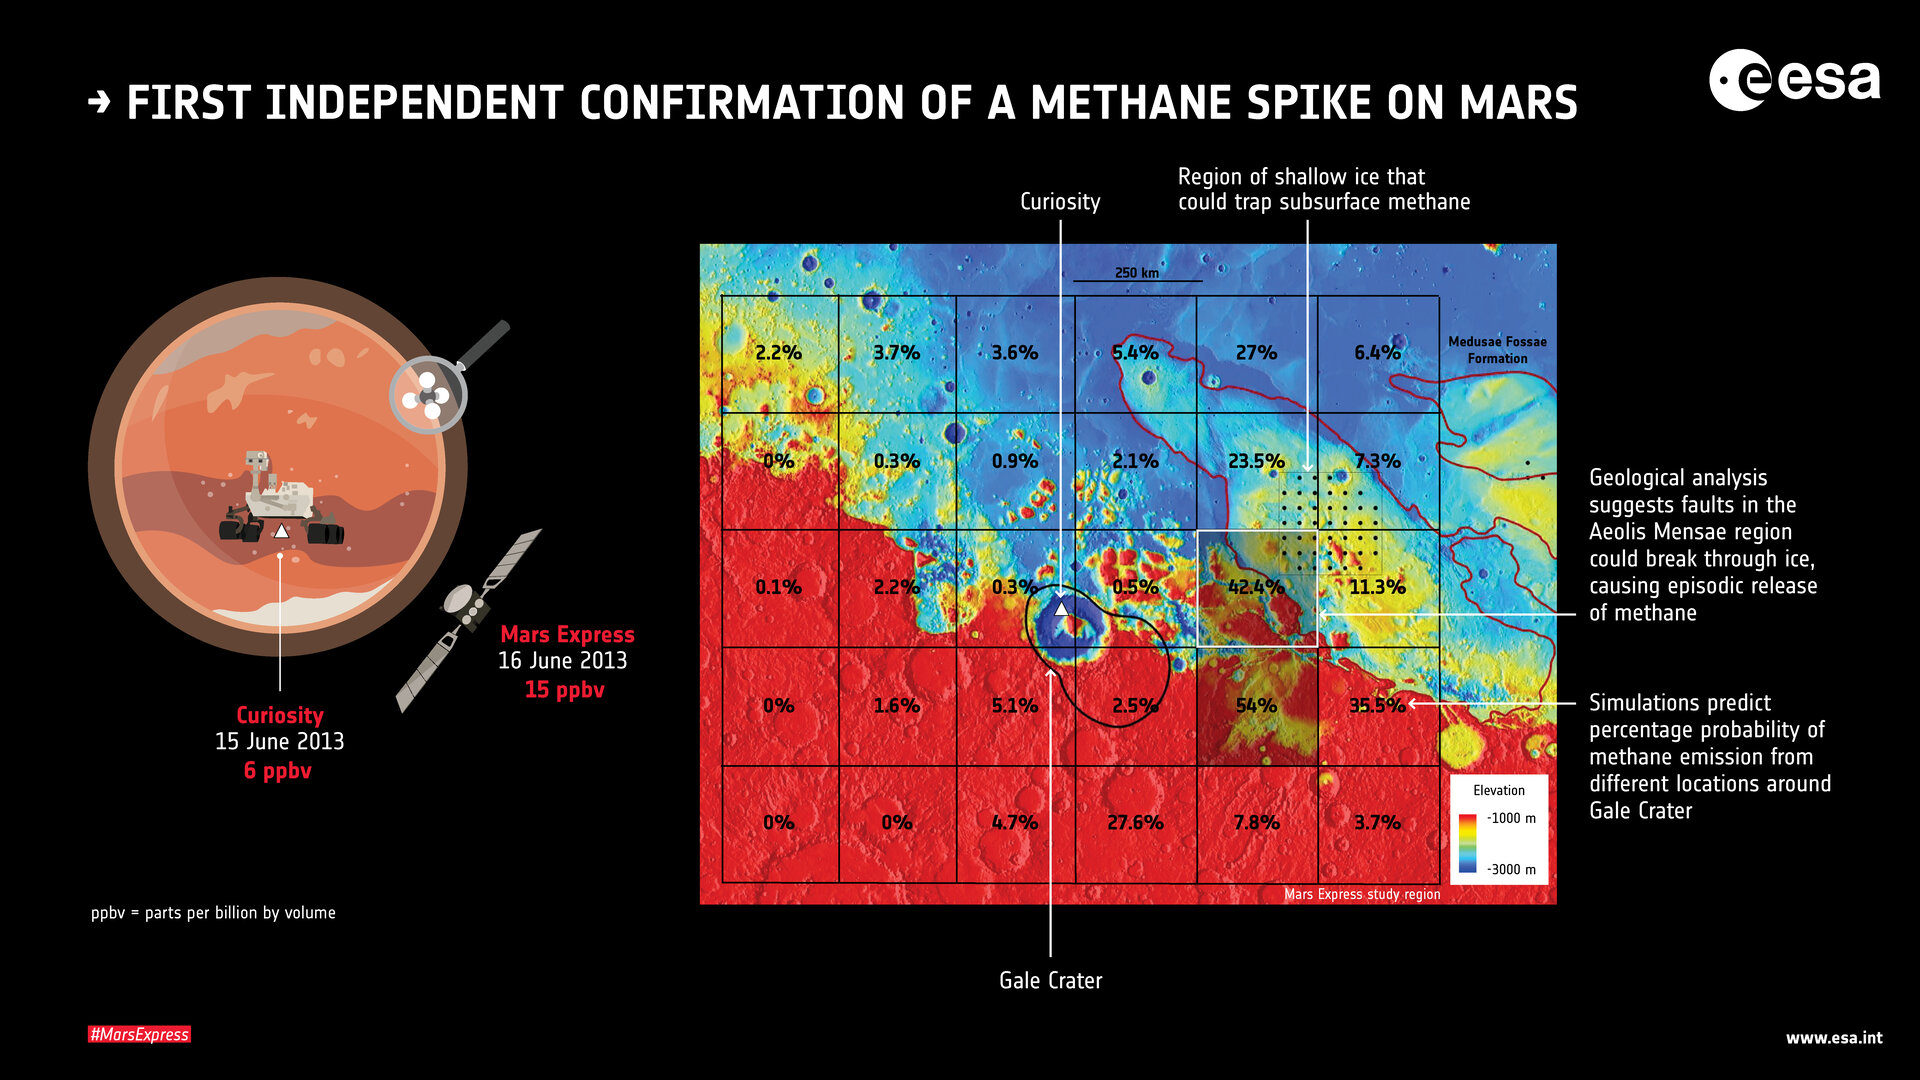 Mars Express matches methane spike measured by Curiosity